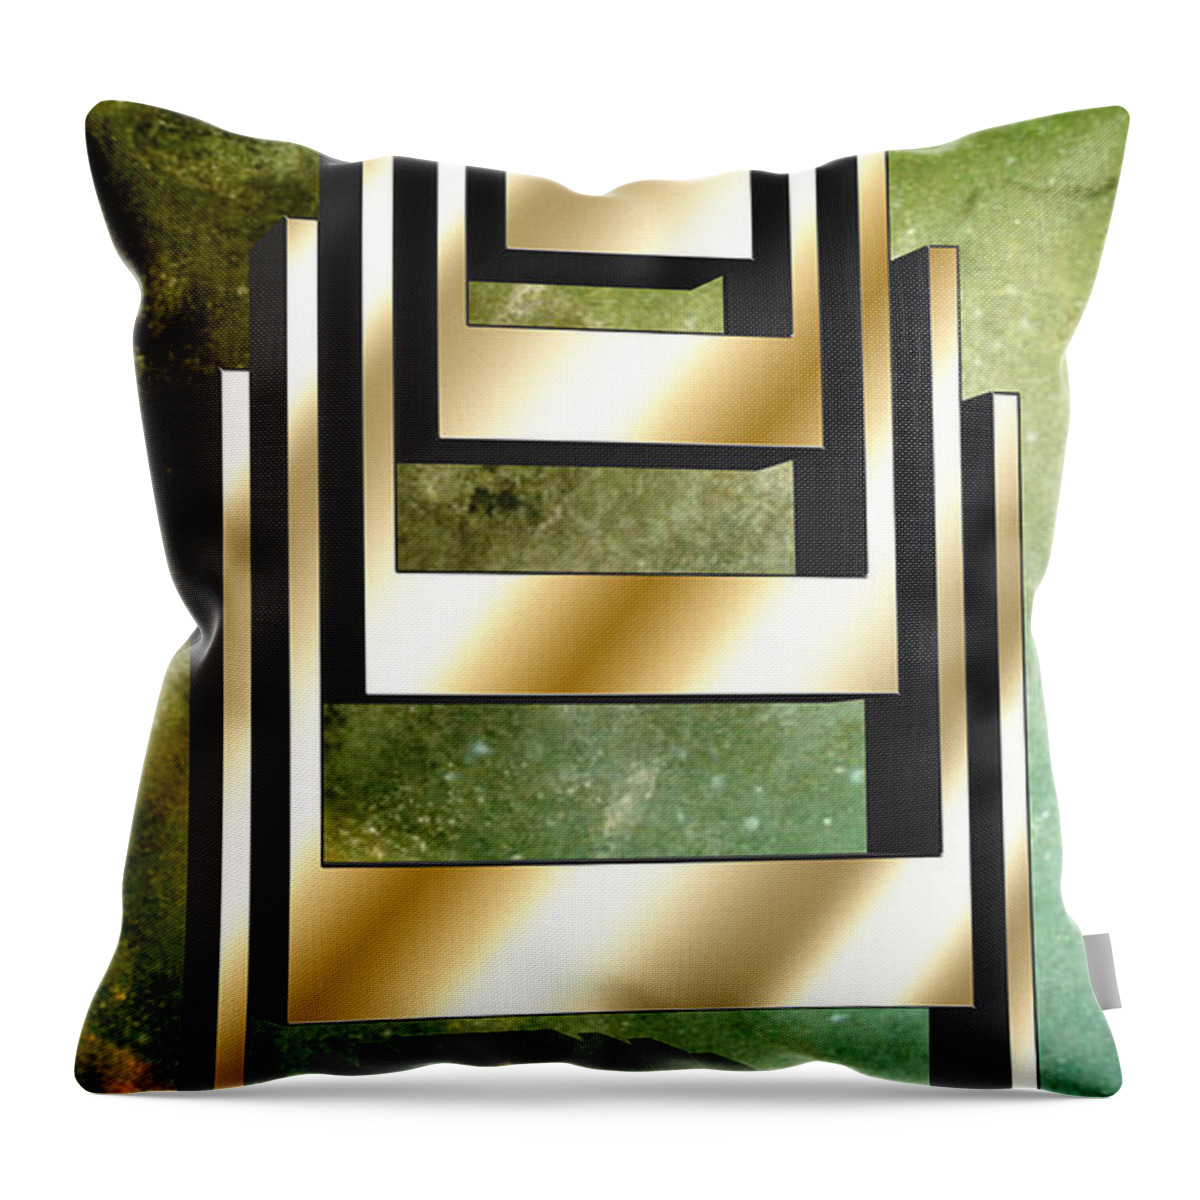 Staley Throw Pillow featuring the digital art Vertical Design 2 by Chuck Staley